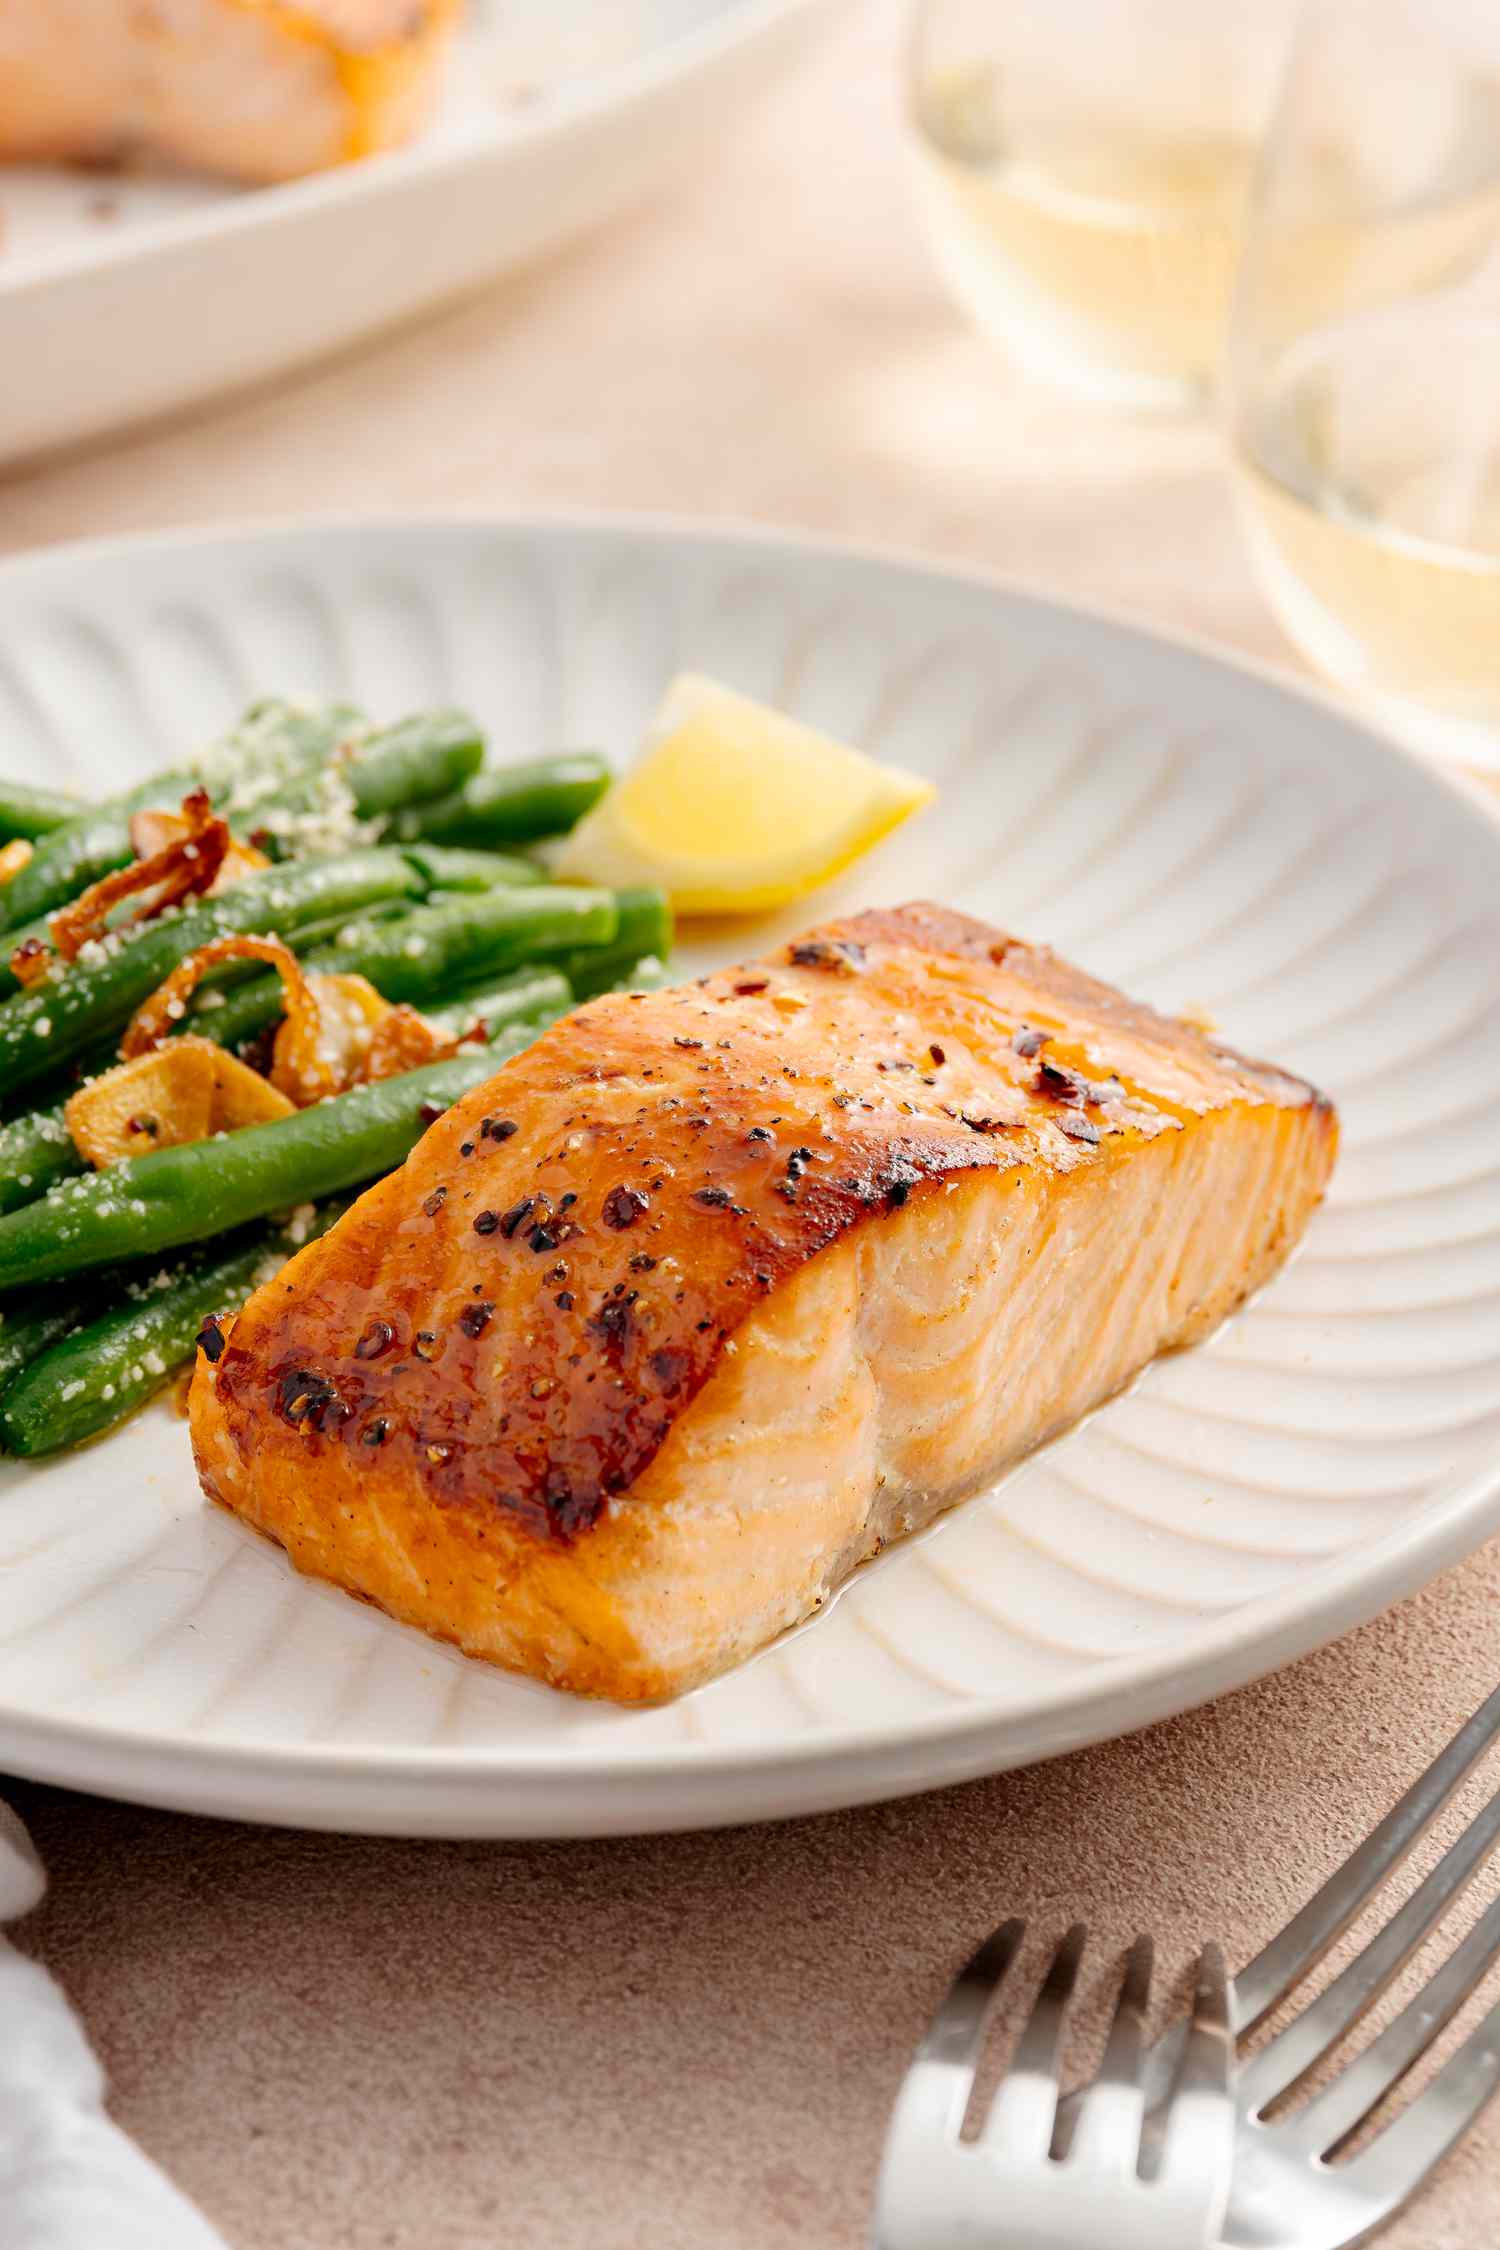 Salmon with Brown Sugar Glaze on a Plate with a Side of Green Beans